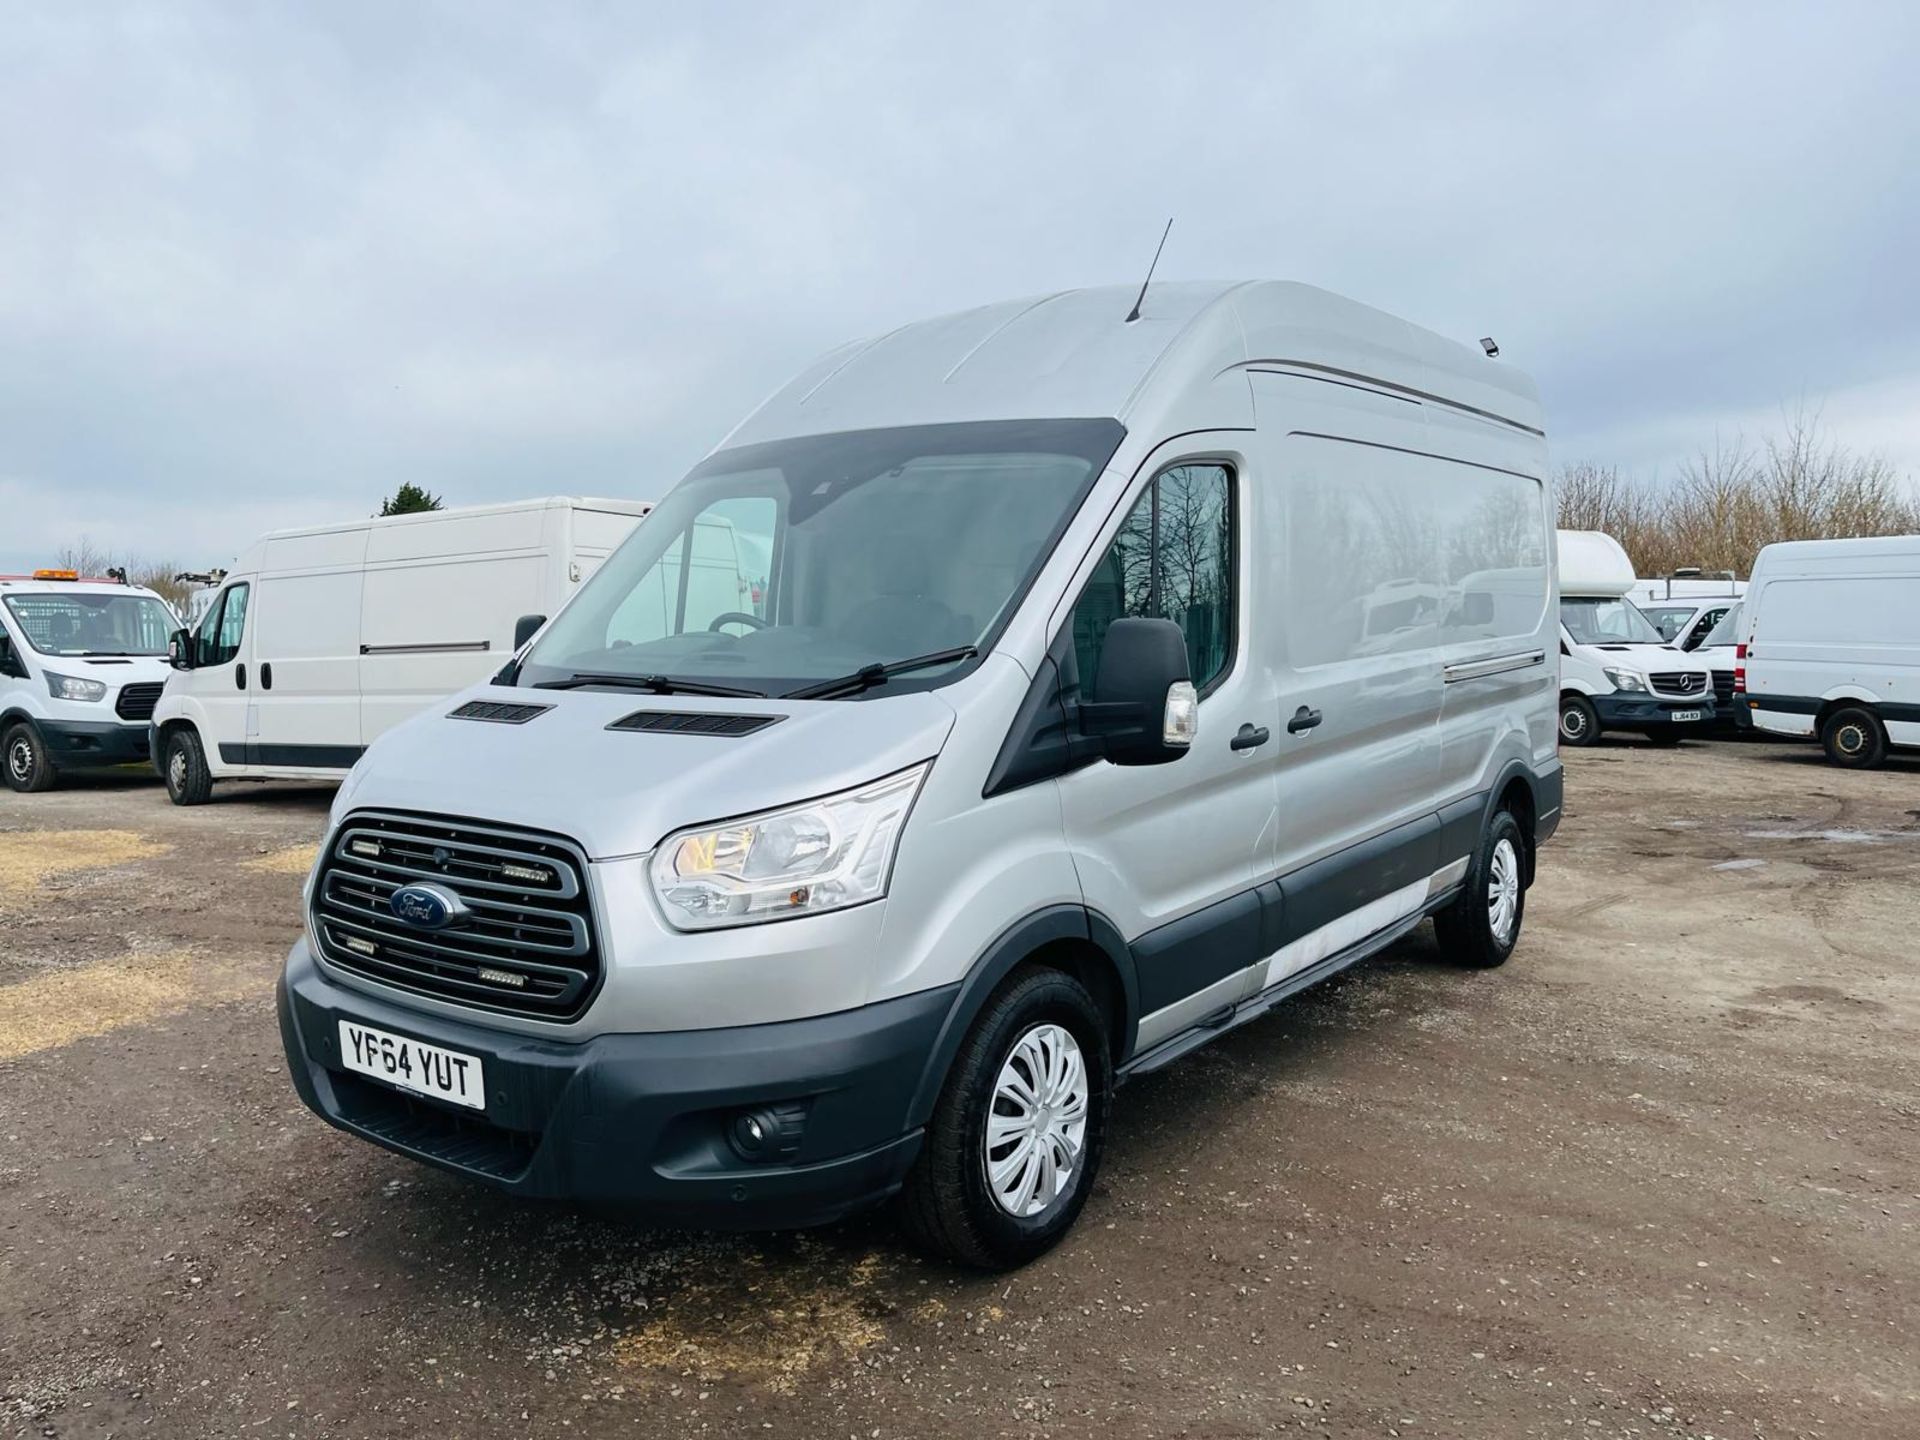 Ford Transit Trend 350 TDCI 125 2.2 L3 H3 2014 '64 Reg' - Parking sensors - Air Conditioning - Image 3 of 27